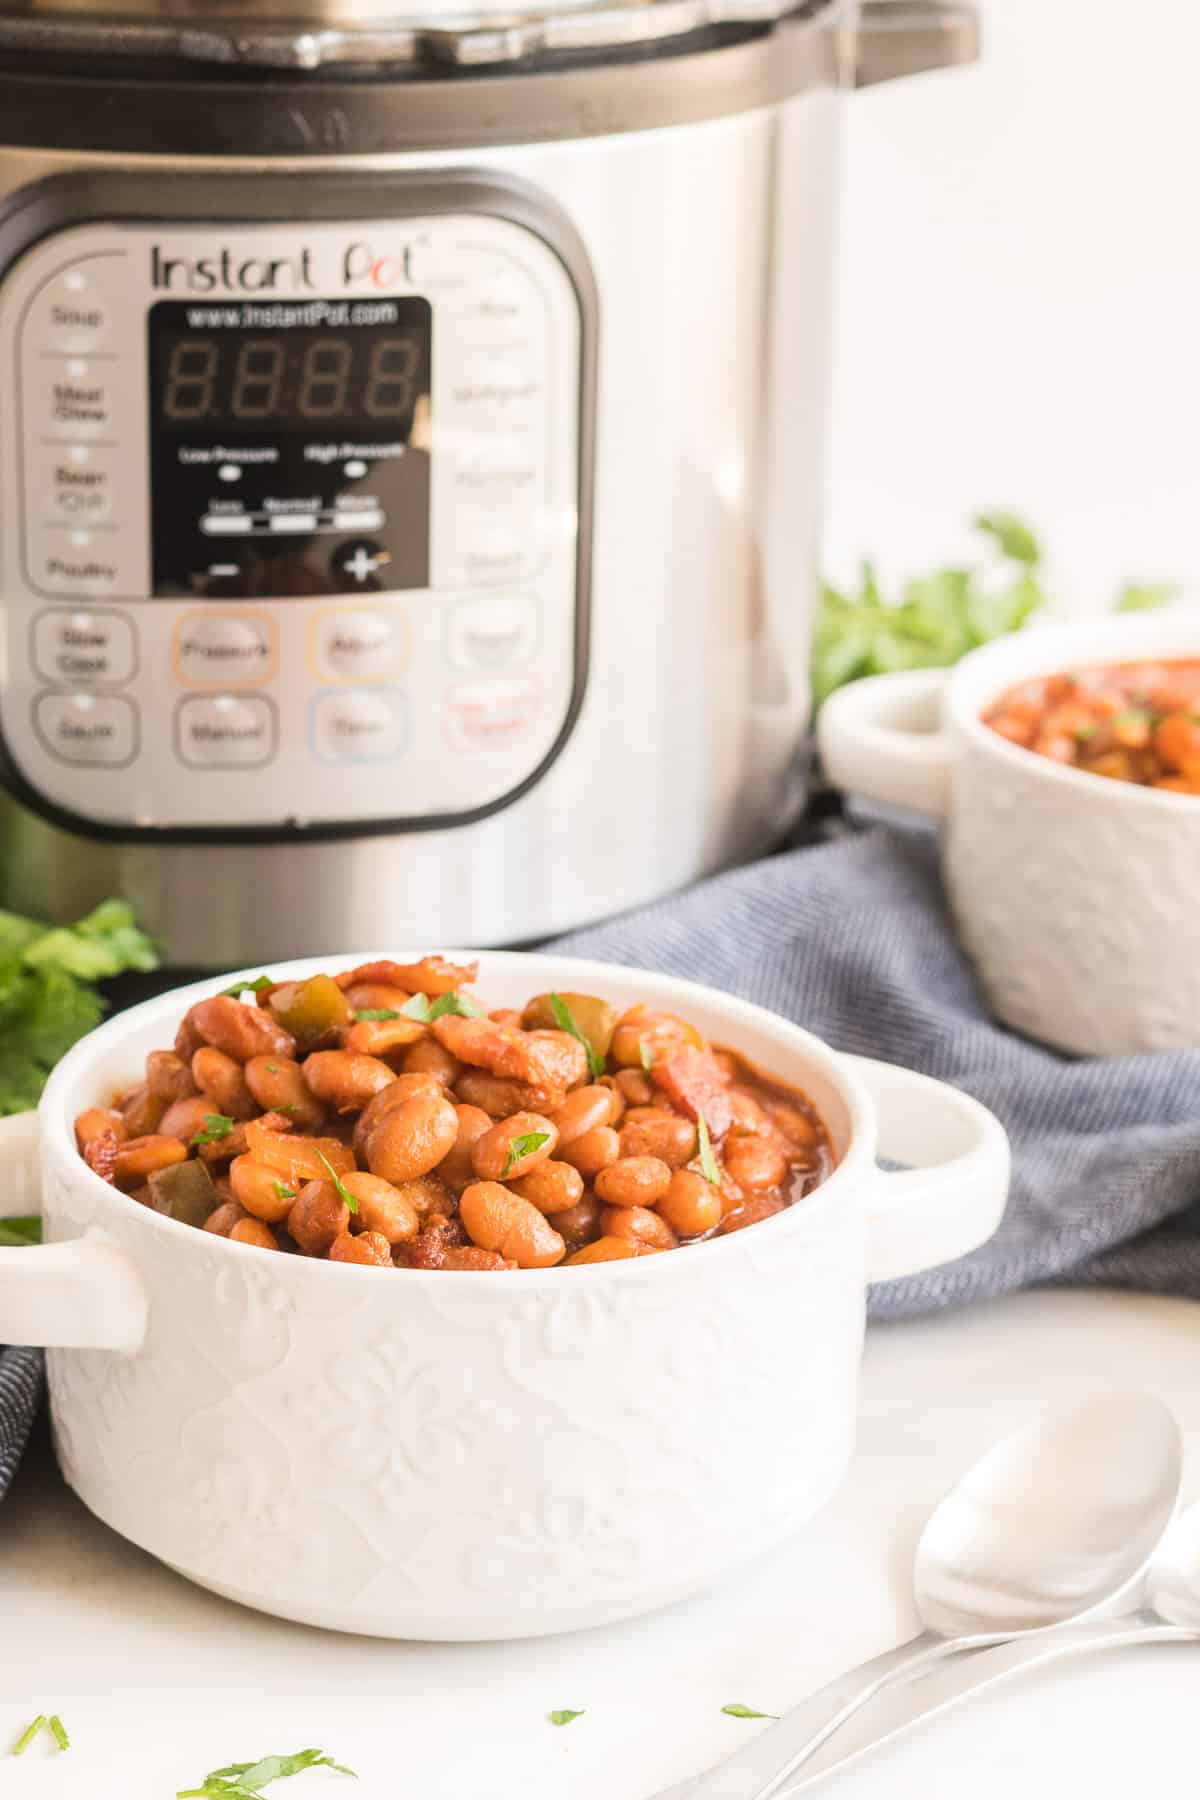 A white serving dish filled with baked beans sits in front of an Instant Pot.